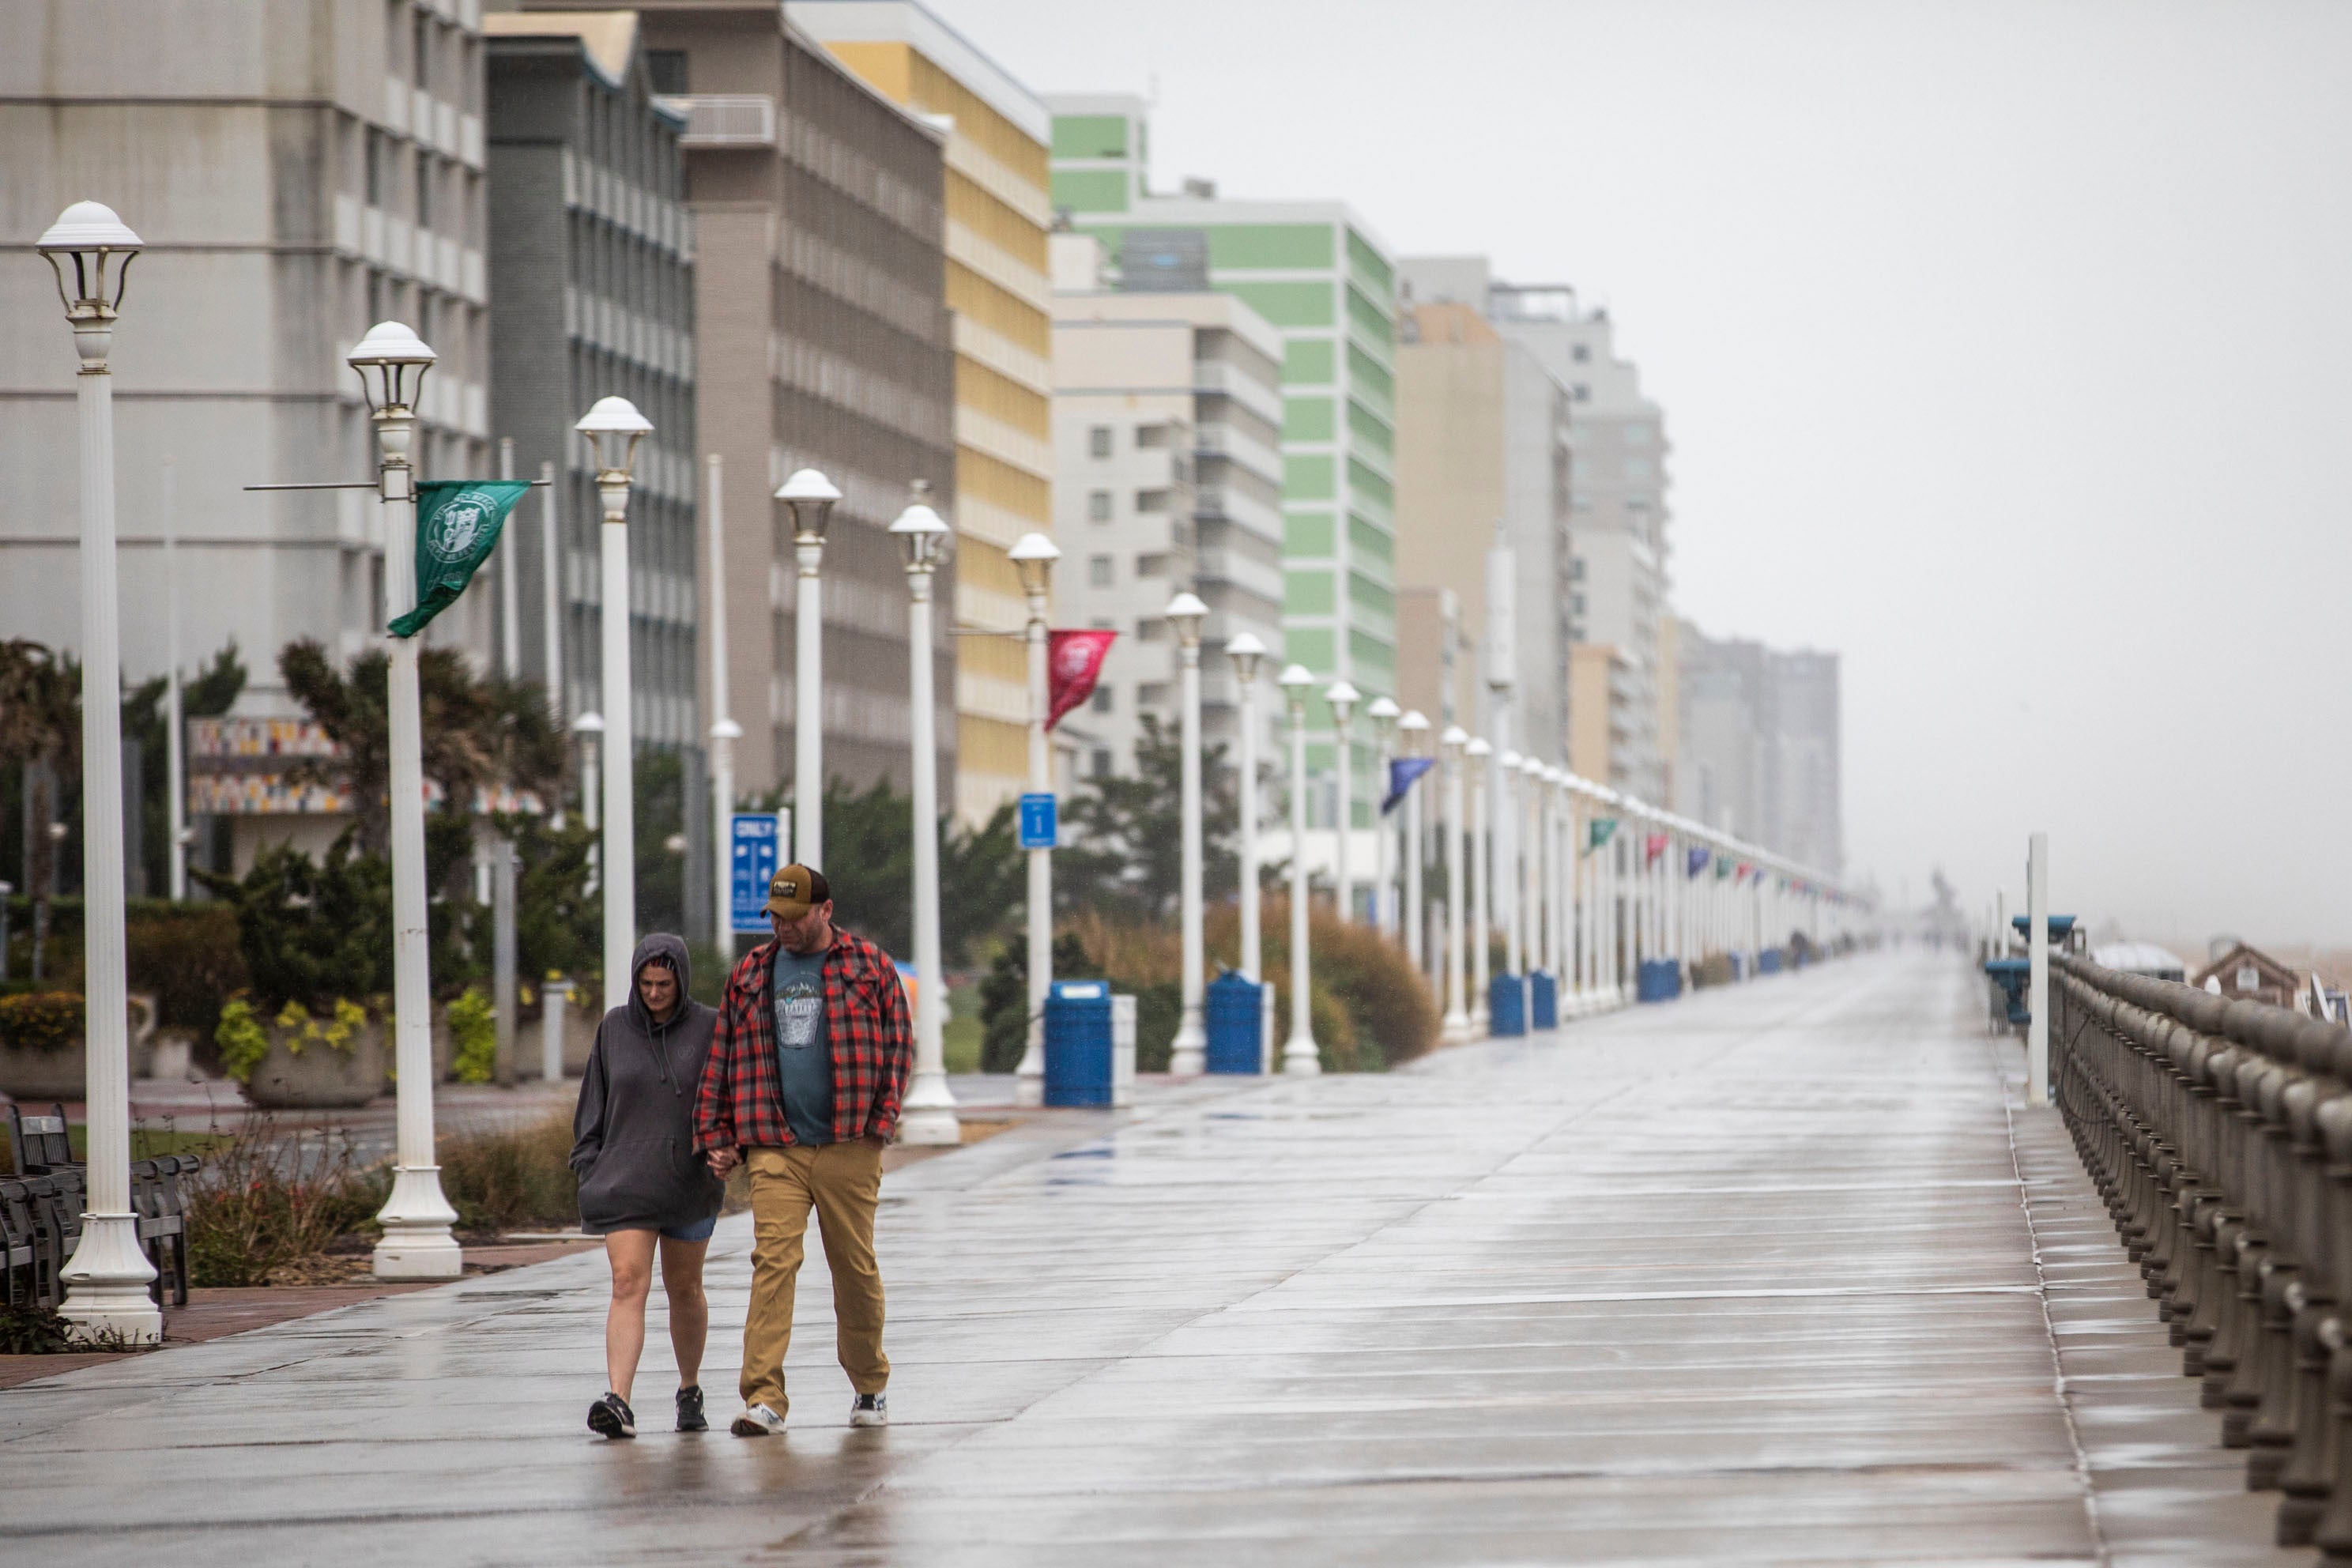 Beach-goers brave the weather and walk along the boardwalk at the Virginia Beach Oceanfront on Friday, Sept. 22